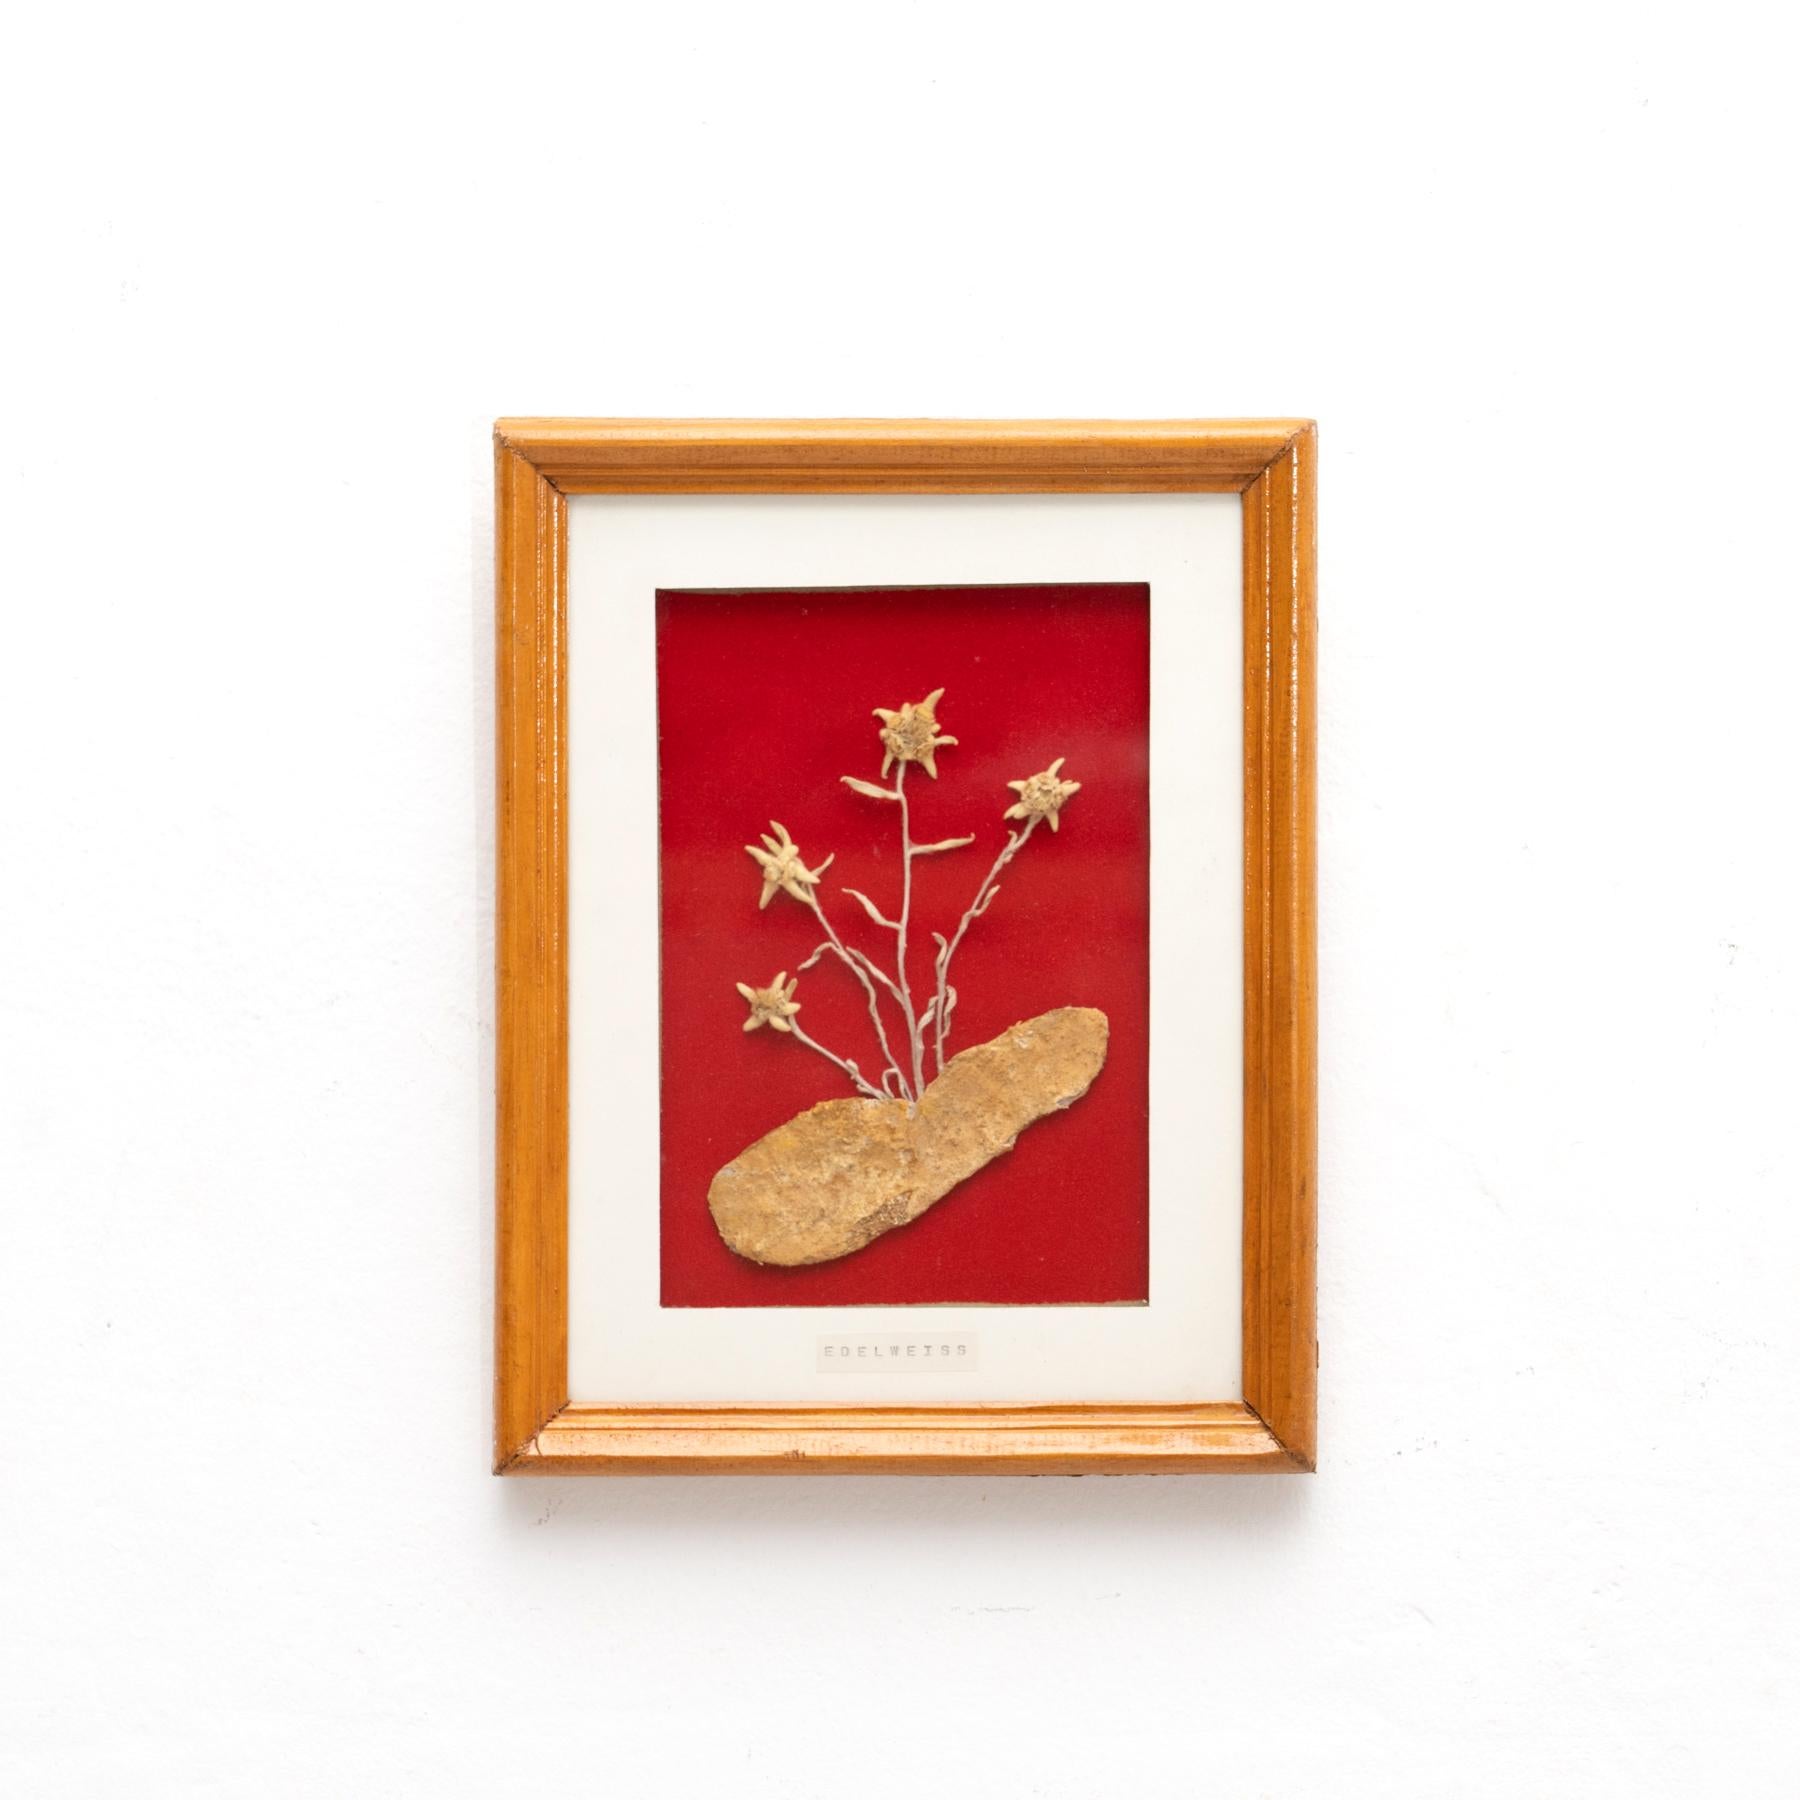 Edelweiss plant artwork by unknown artist, circa 1960.
Framed. 

In original condition, with minor wear consistent of age and use, preserving a beautiul patina.